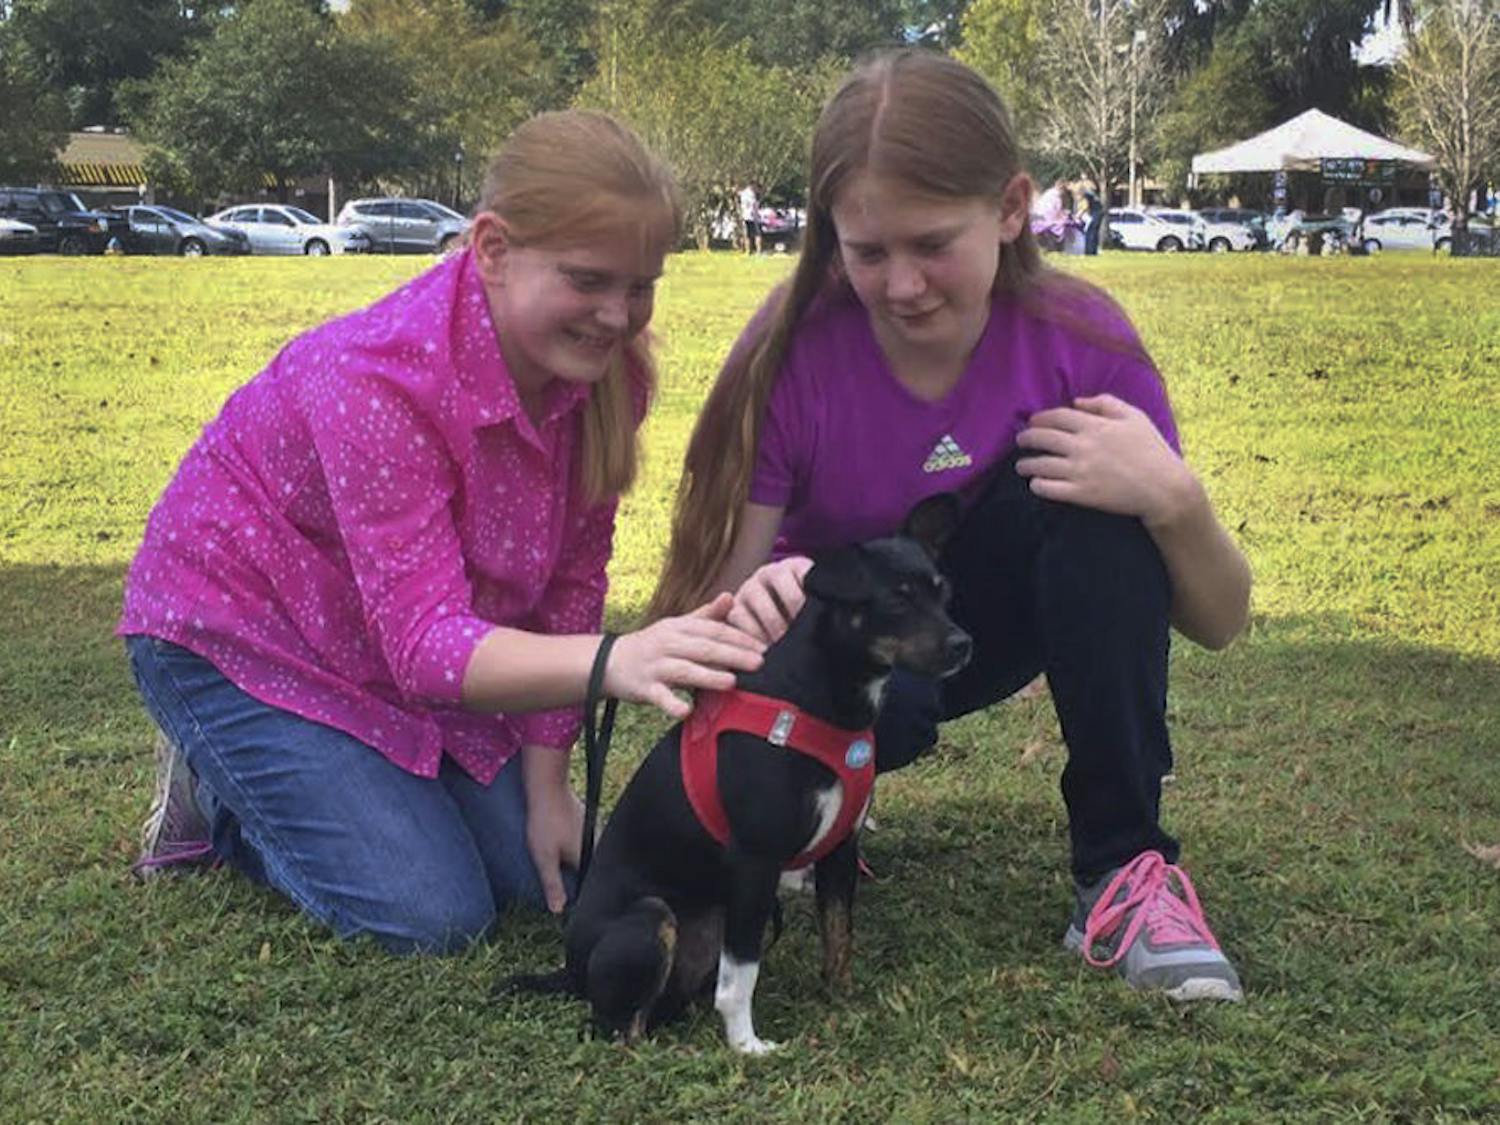 Holly Buss, 9, and Heather Buss, 11, pet Slinky, an almost 2-year-old miniature pinscher and rat terrier mix at the Paws on Parole event on Oct. 24, 2015. Their family was considering adopting the rescue dog, who would be the household’s first.